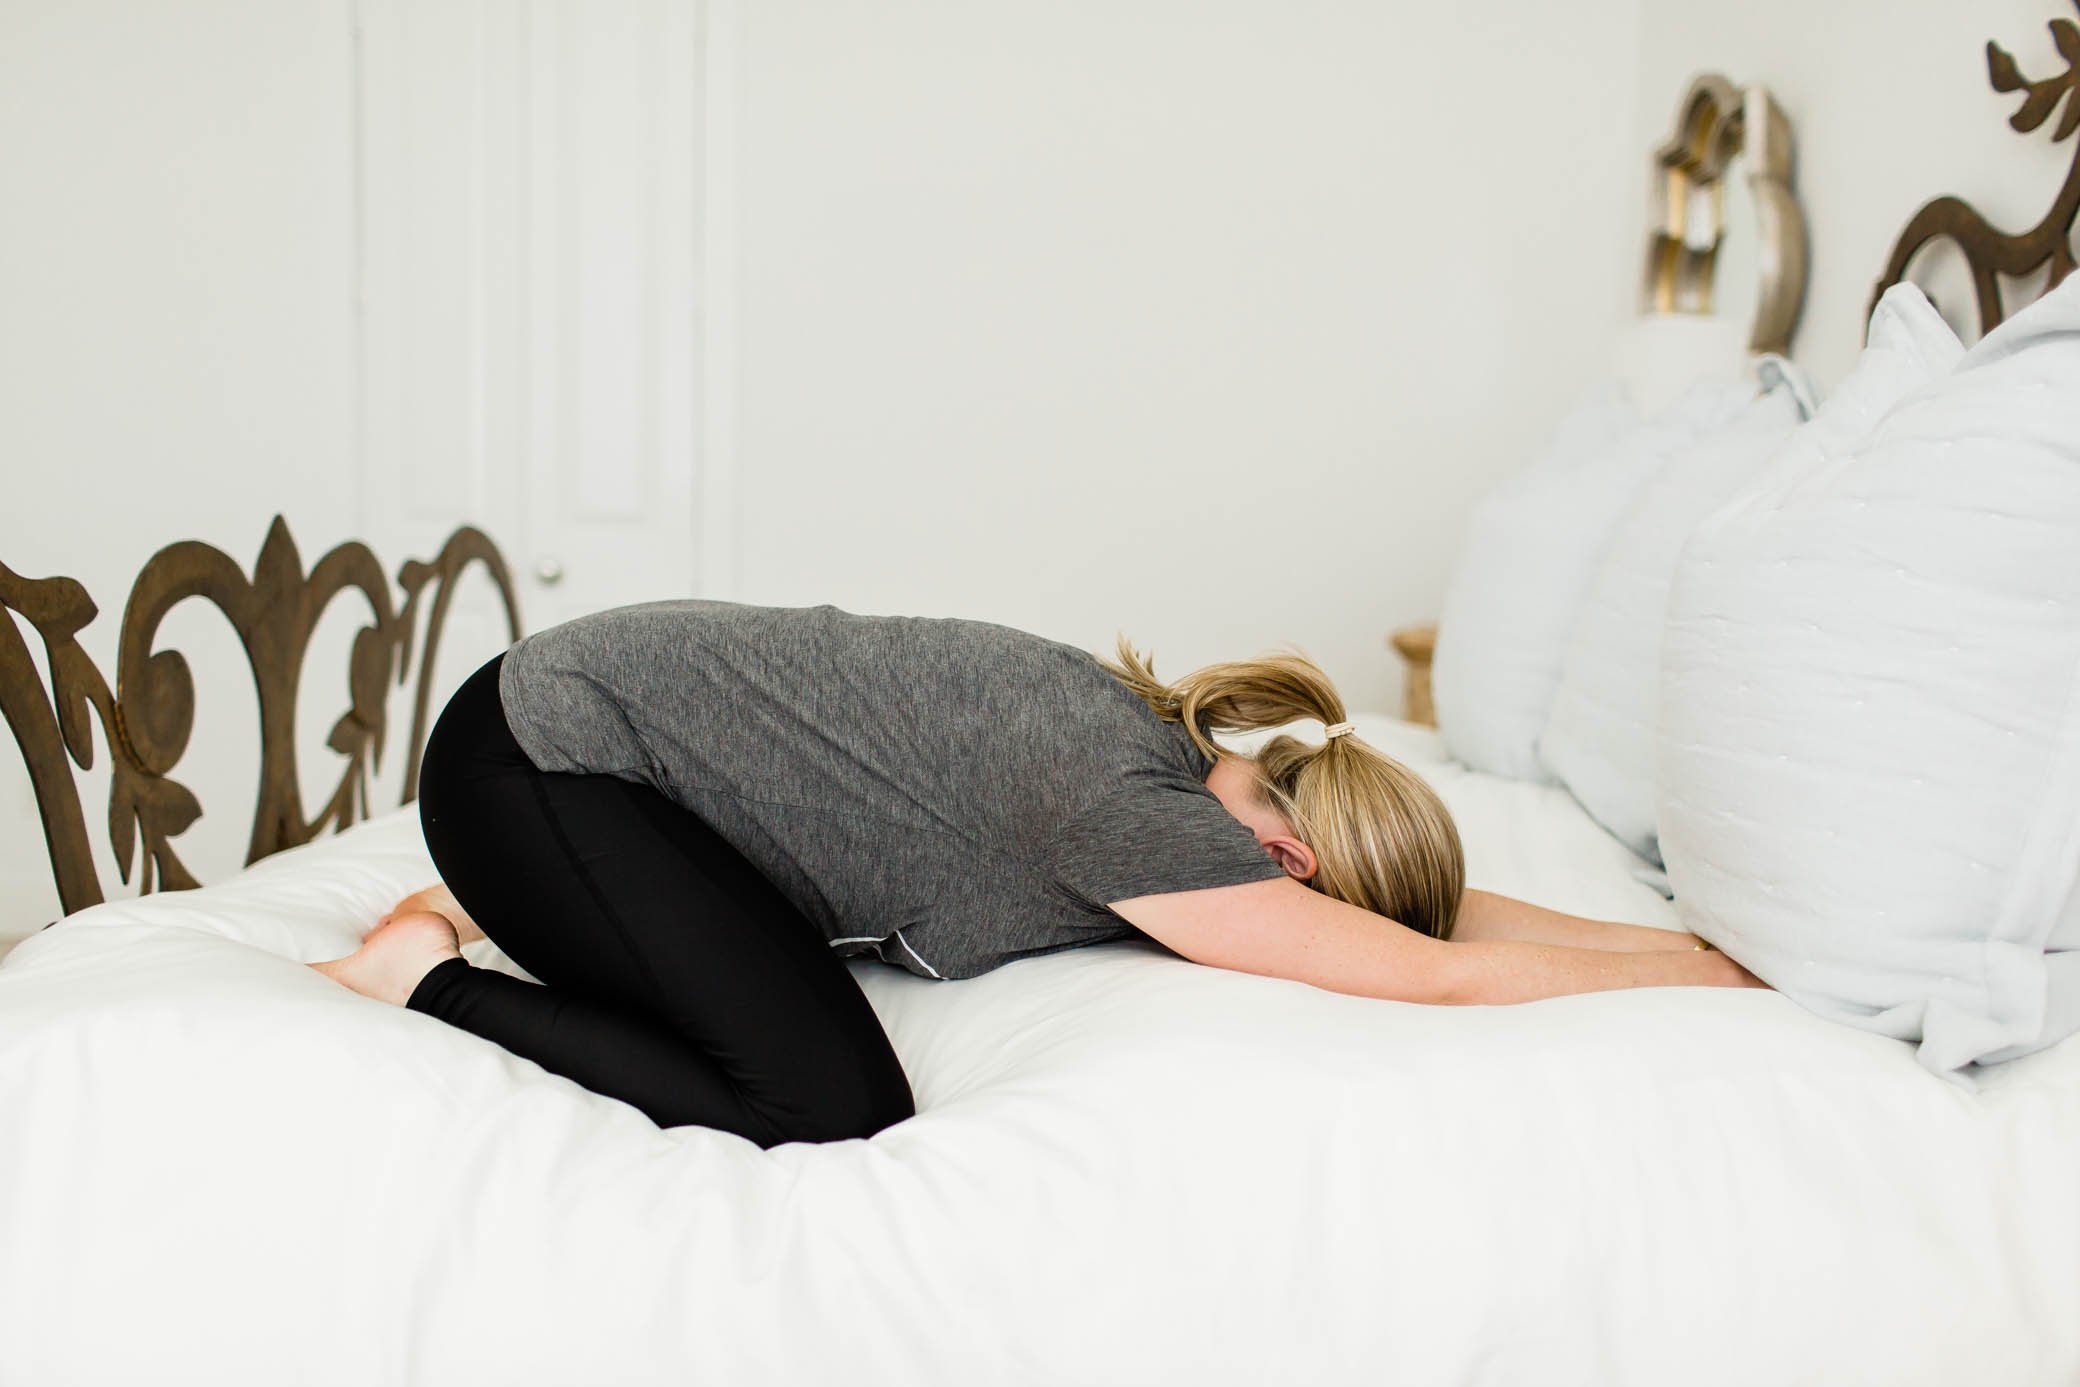 Pregnant woman doing child's pose on her bed.